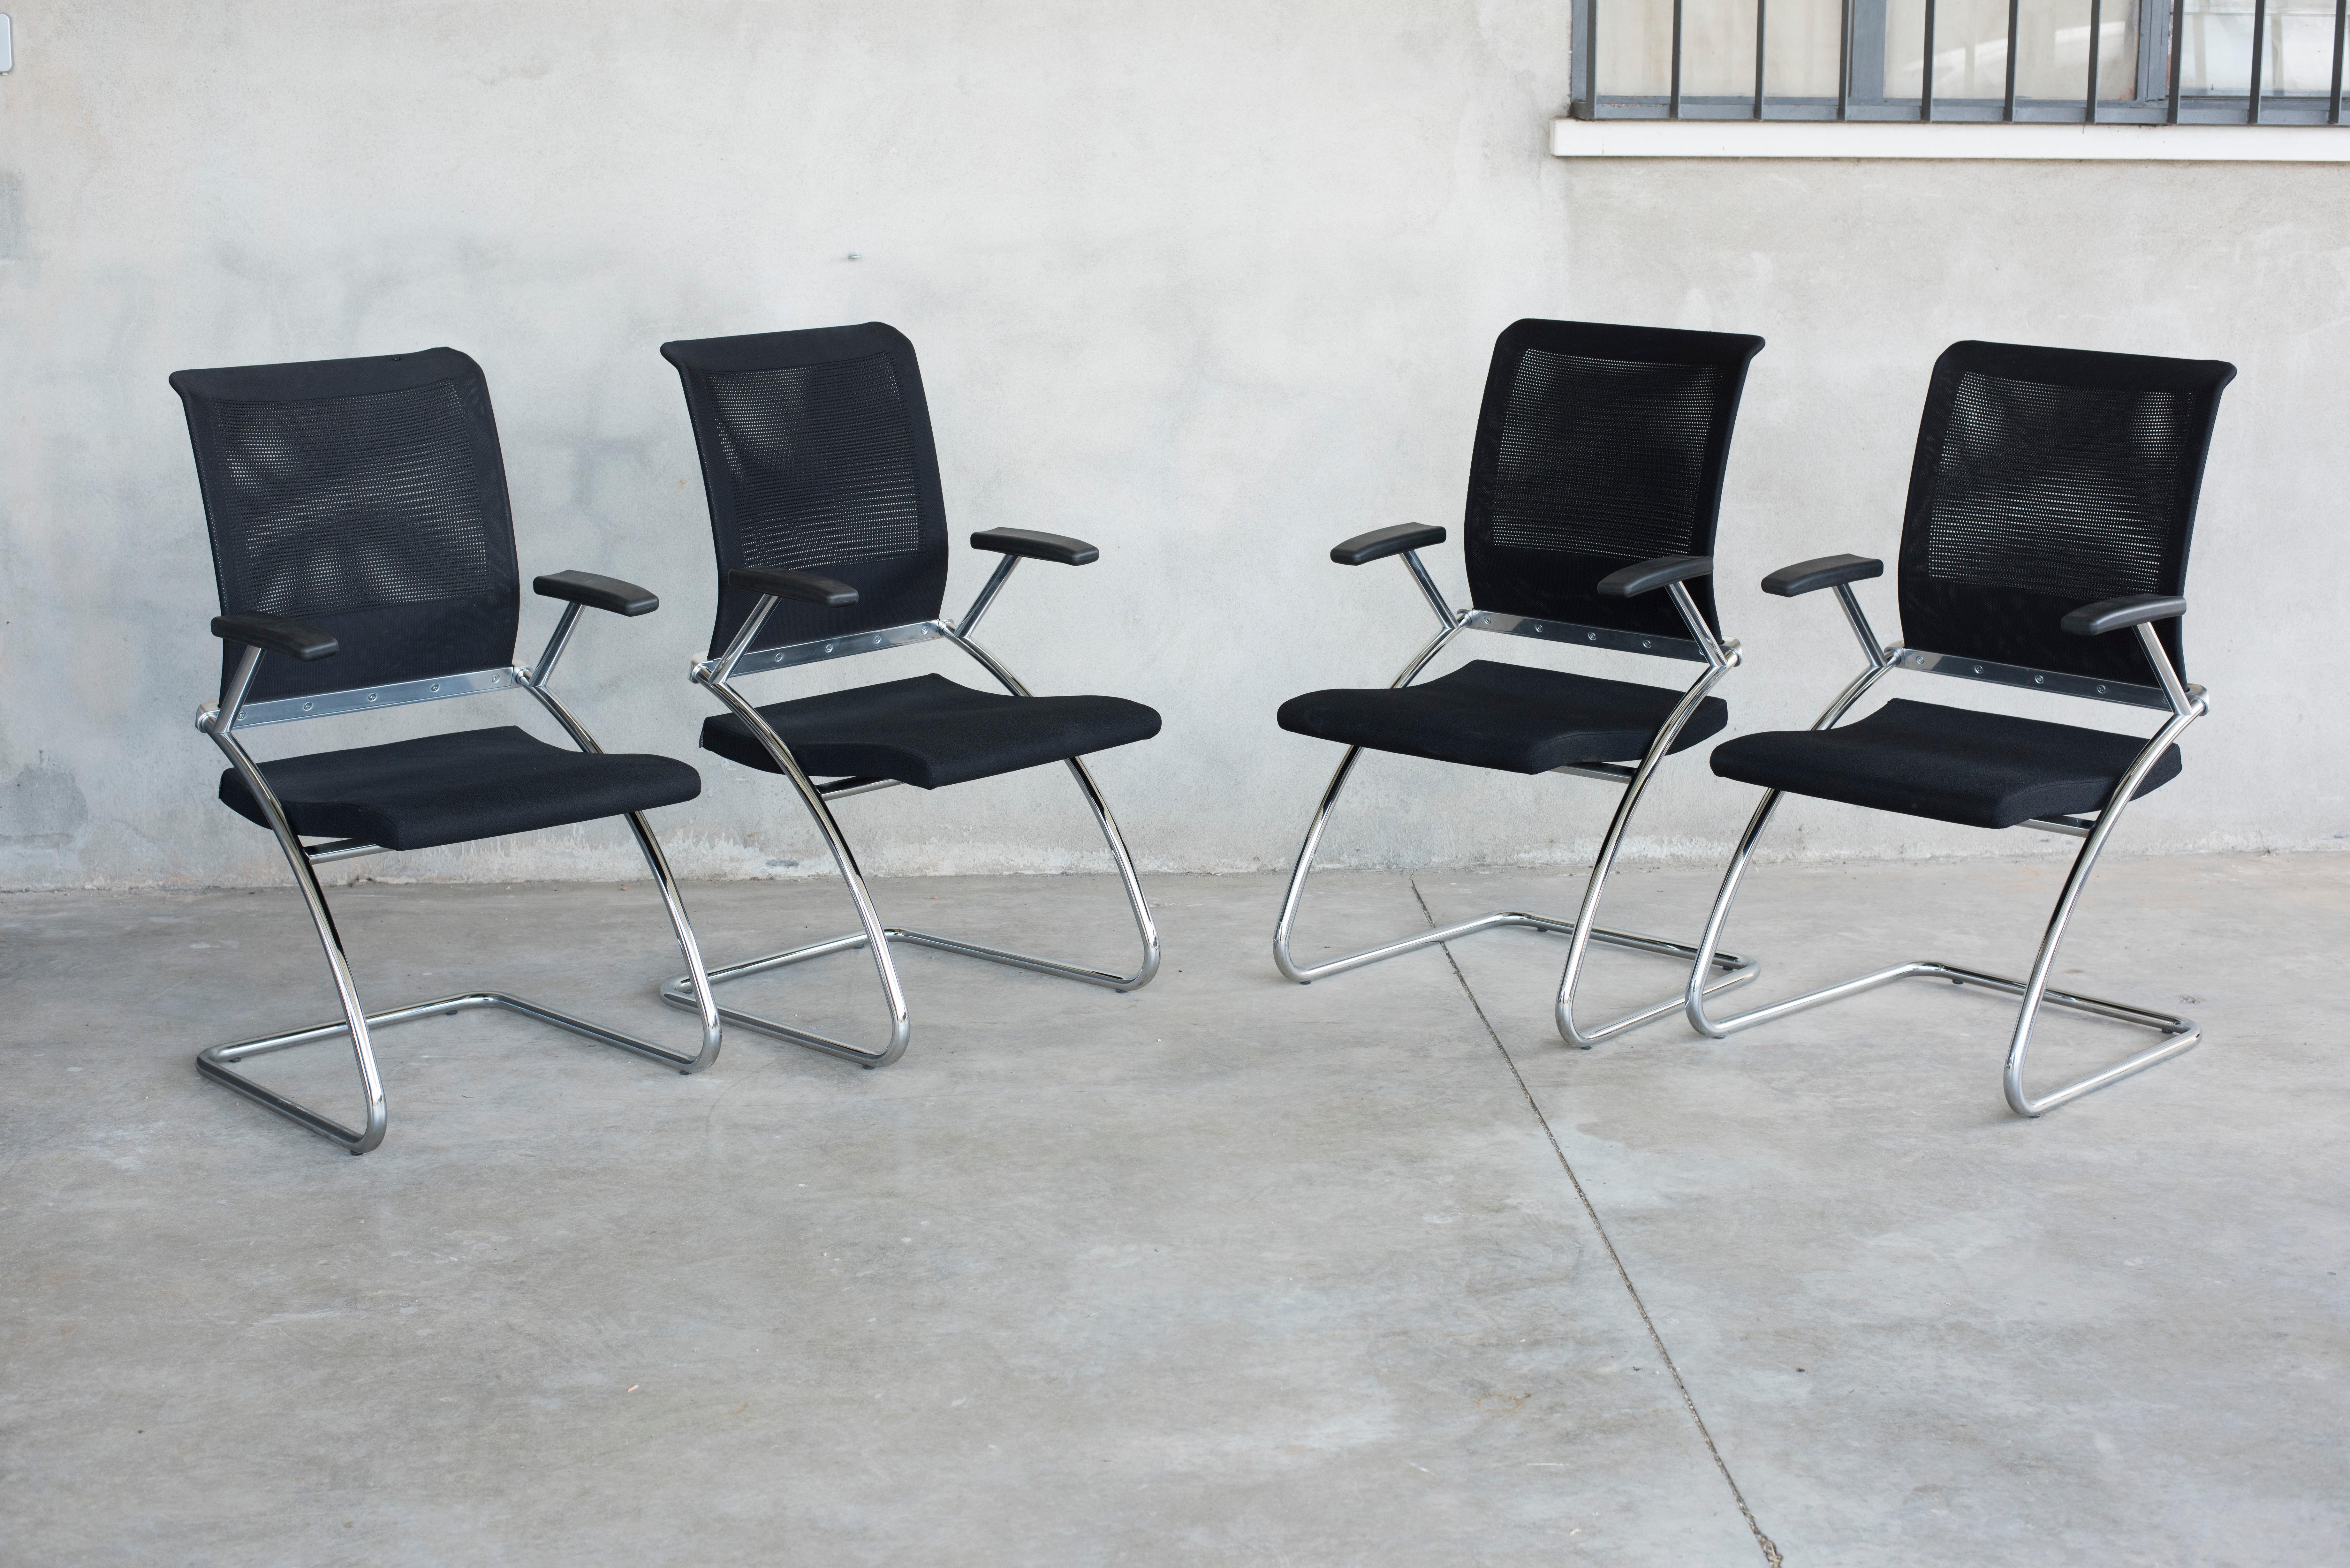 Ergonomic cantilever, eight chairs available. 
Black technical upholstery, chromed steel structure and armrests.
Very comfortable and welcoming with their large and deep seats and high backrest.
From Italy from 1980s production.
Size: w 52 cm x